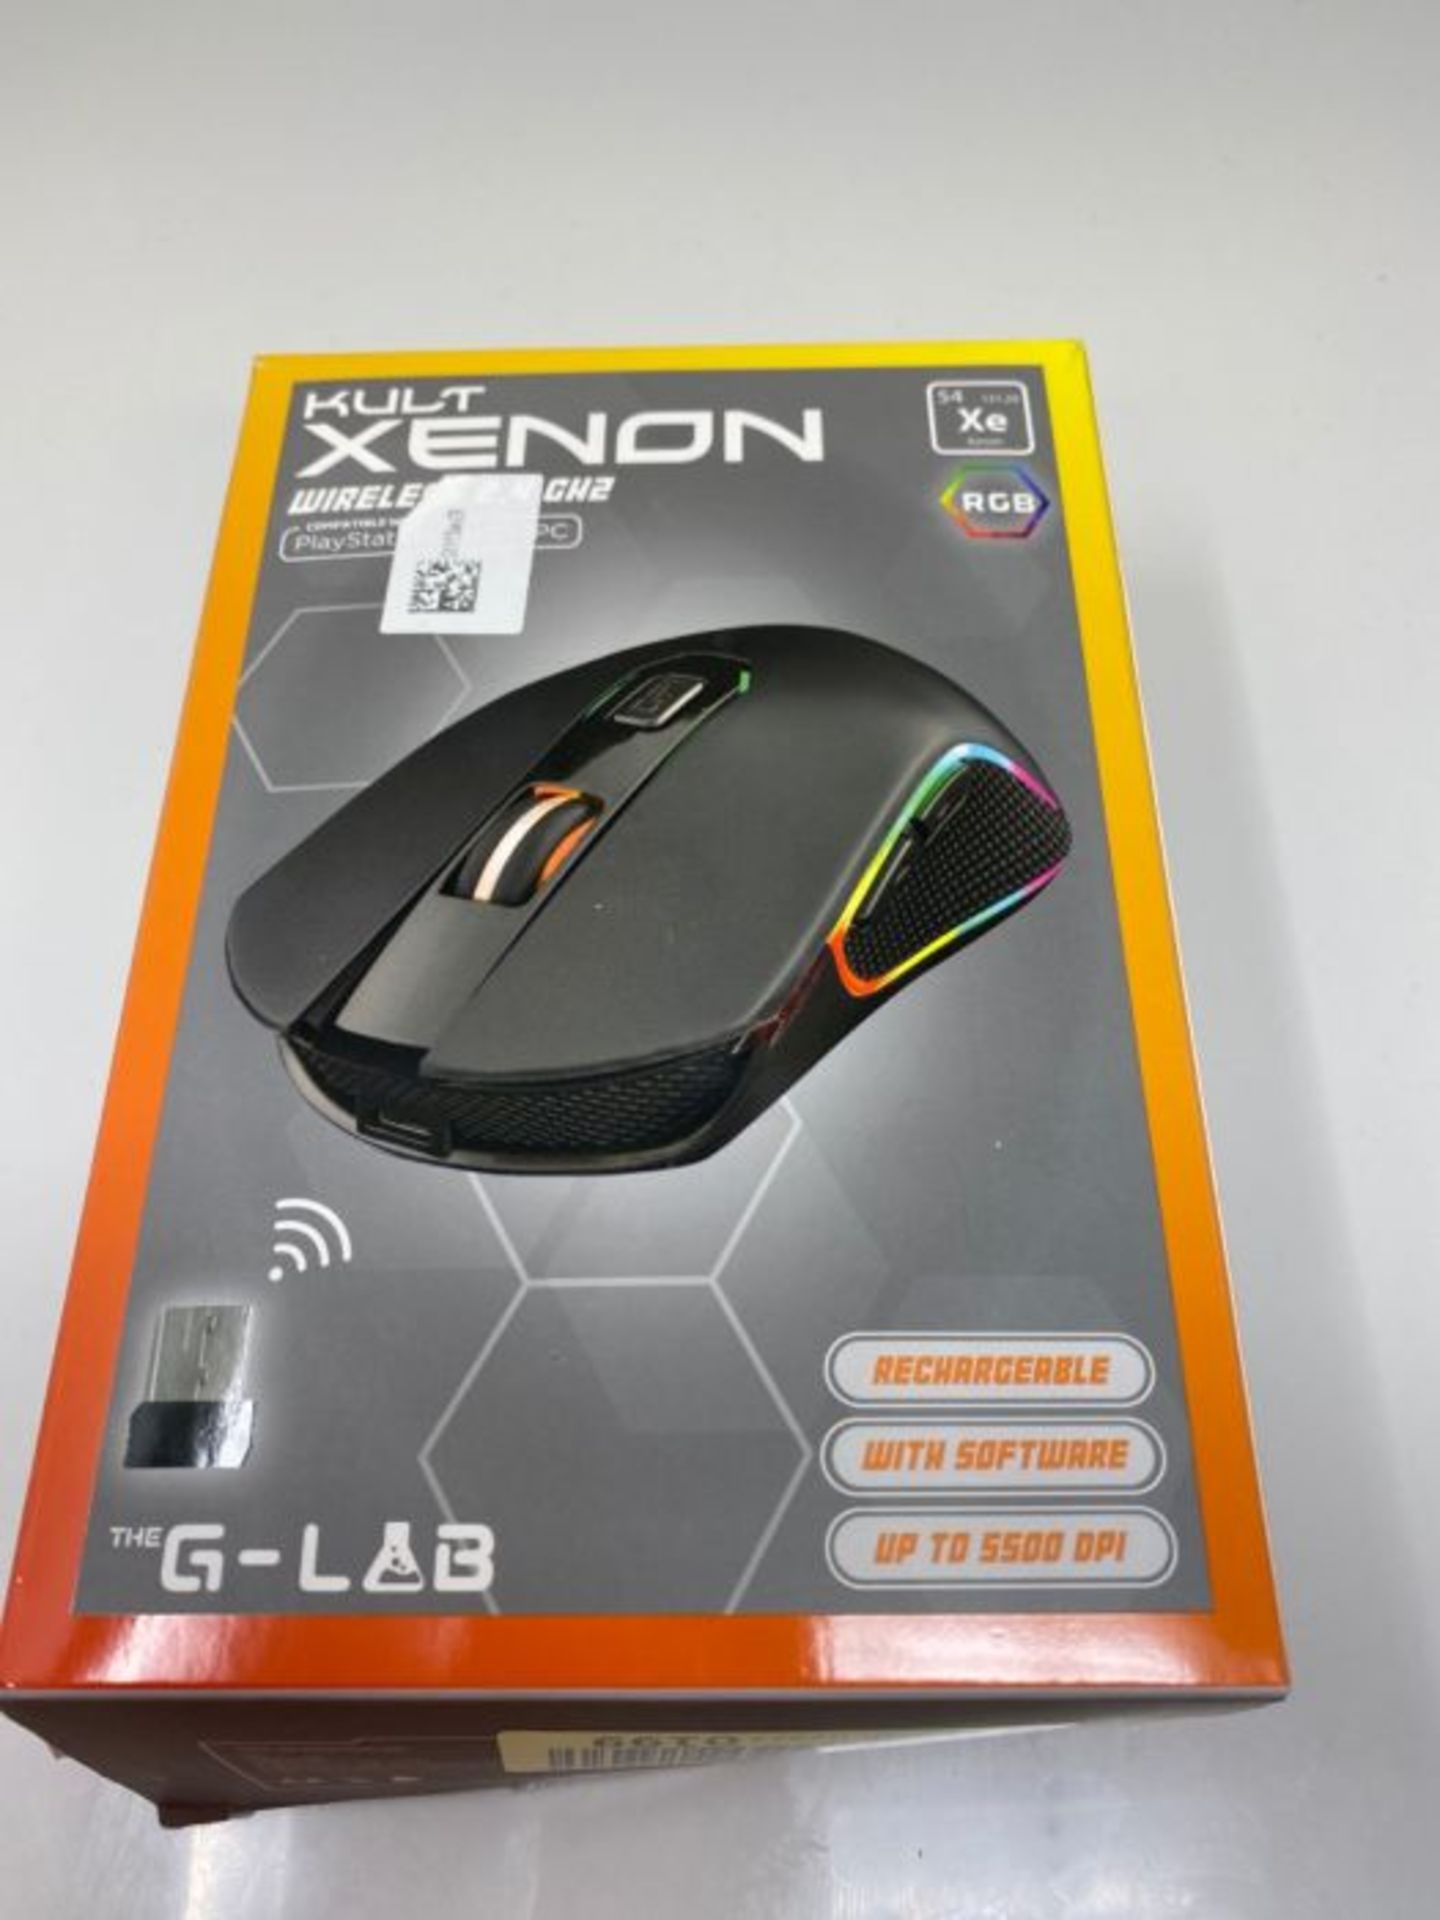 G-LAB Kult XENON Rechargeable Wireless Gaming Mouse - High Performance 5000 DPI Wirele - Image 2 of 3